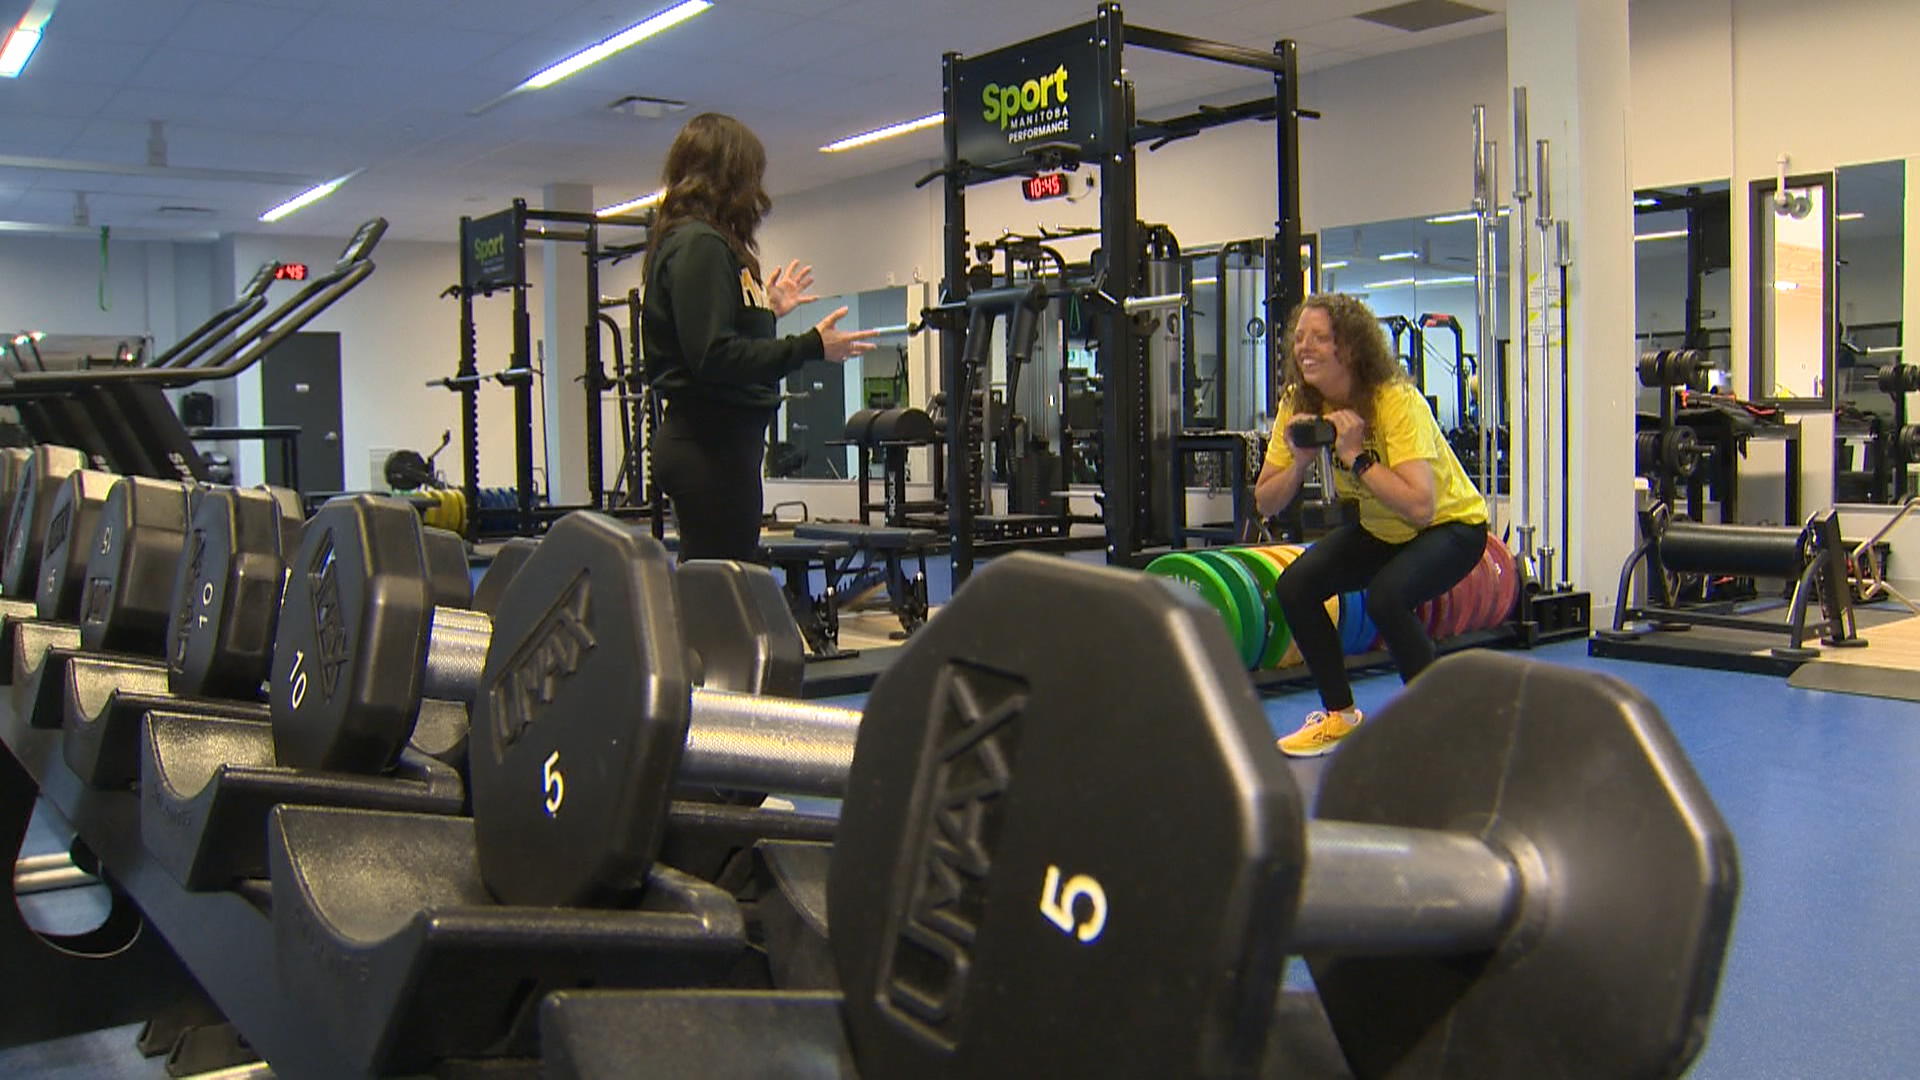 ‘A lifetime experience’: Manitoba athletes gear up for Special Olympics winter games